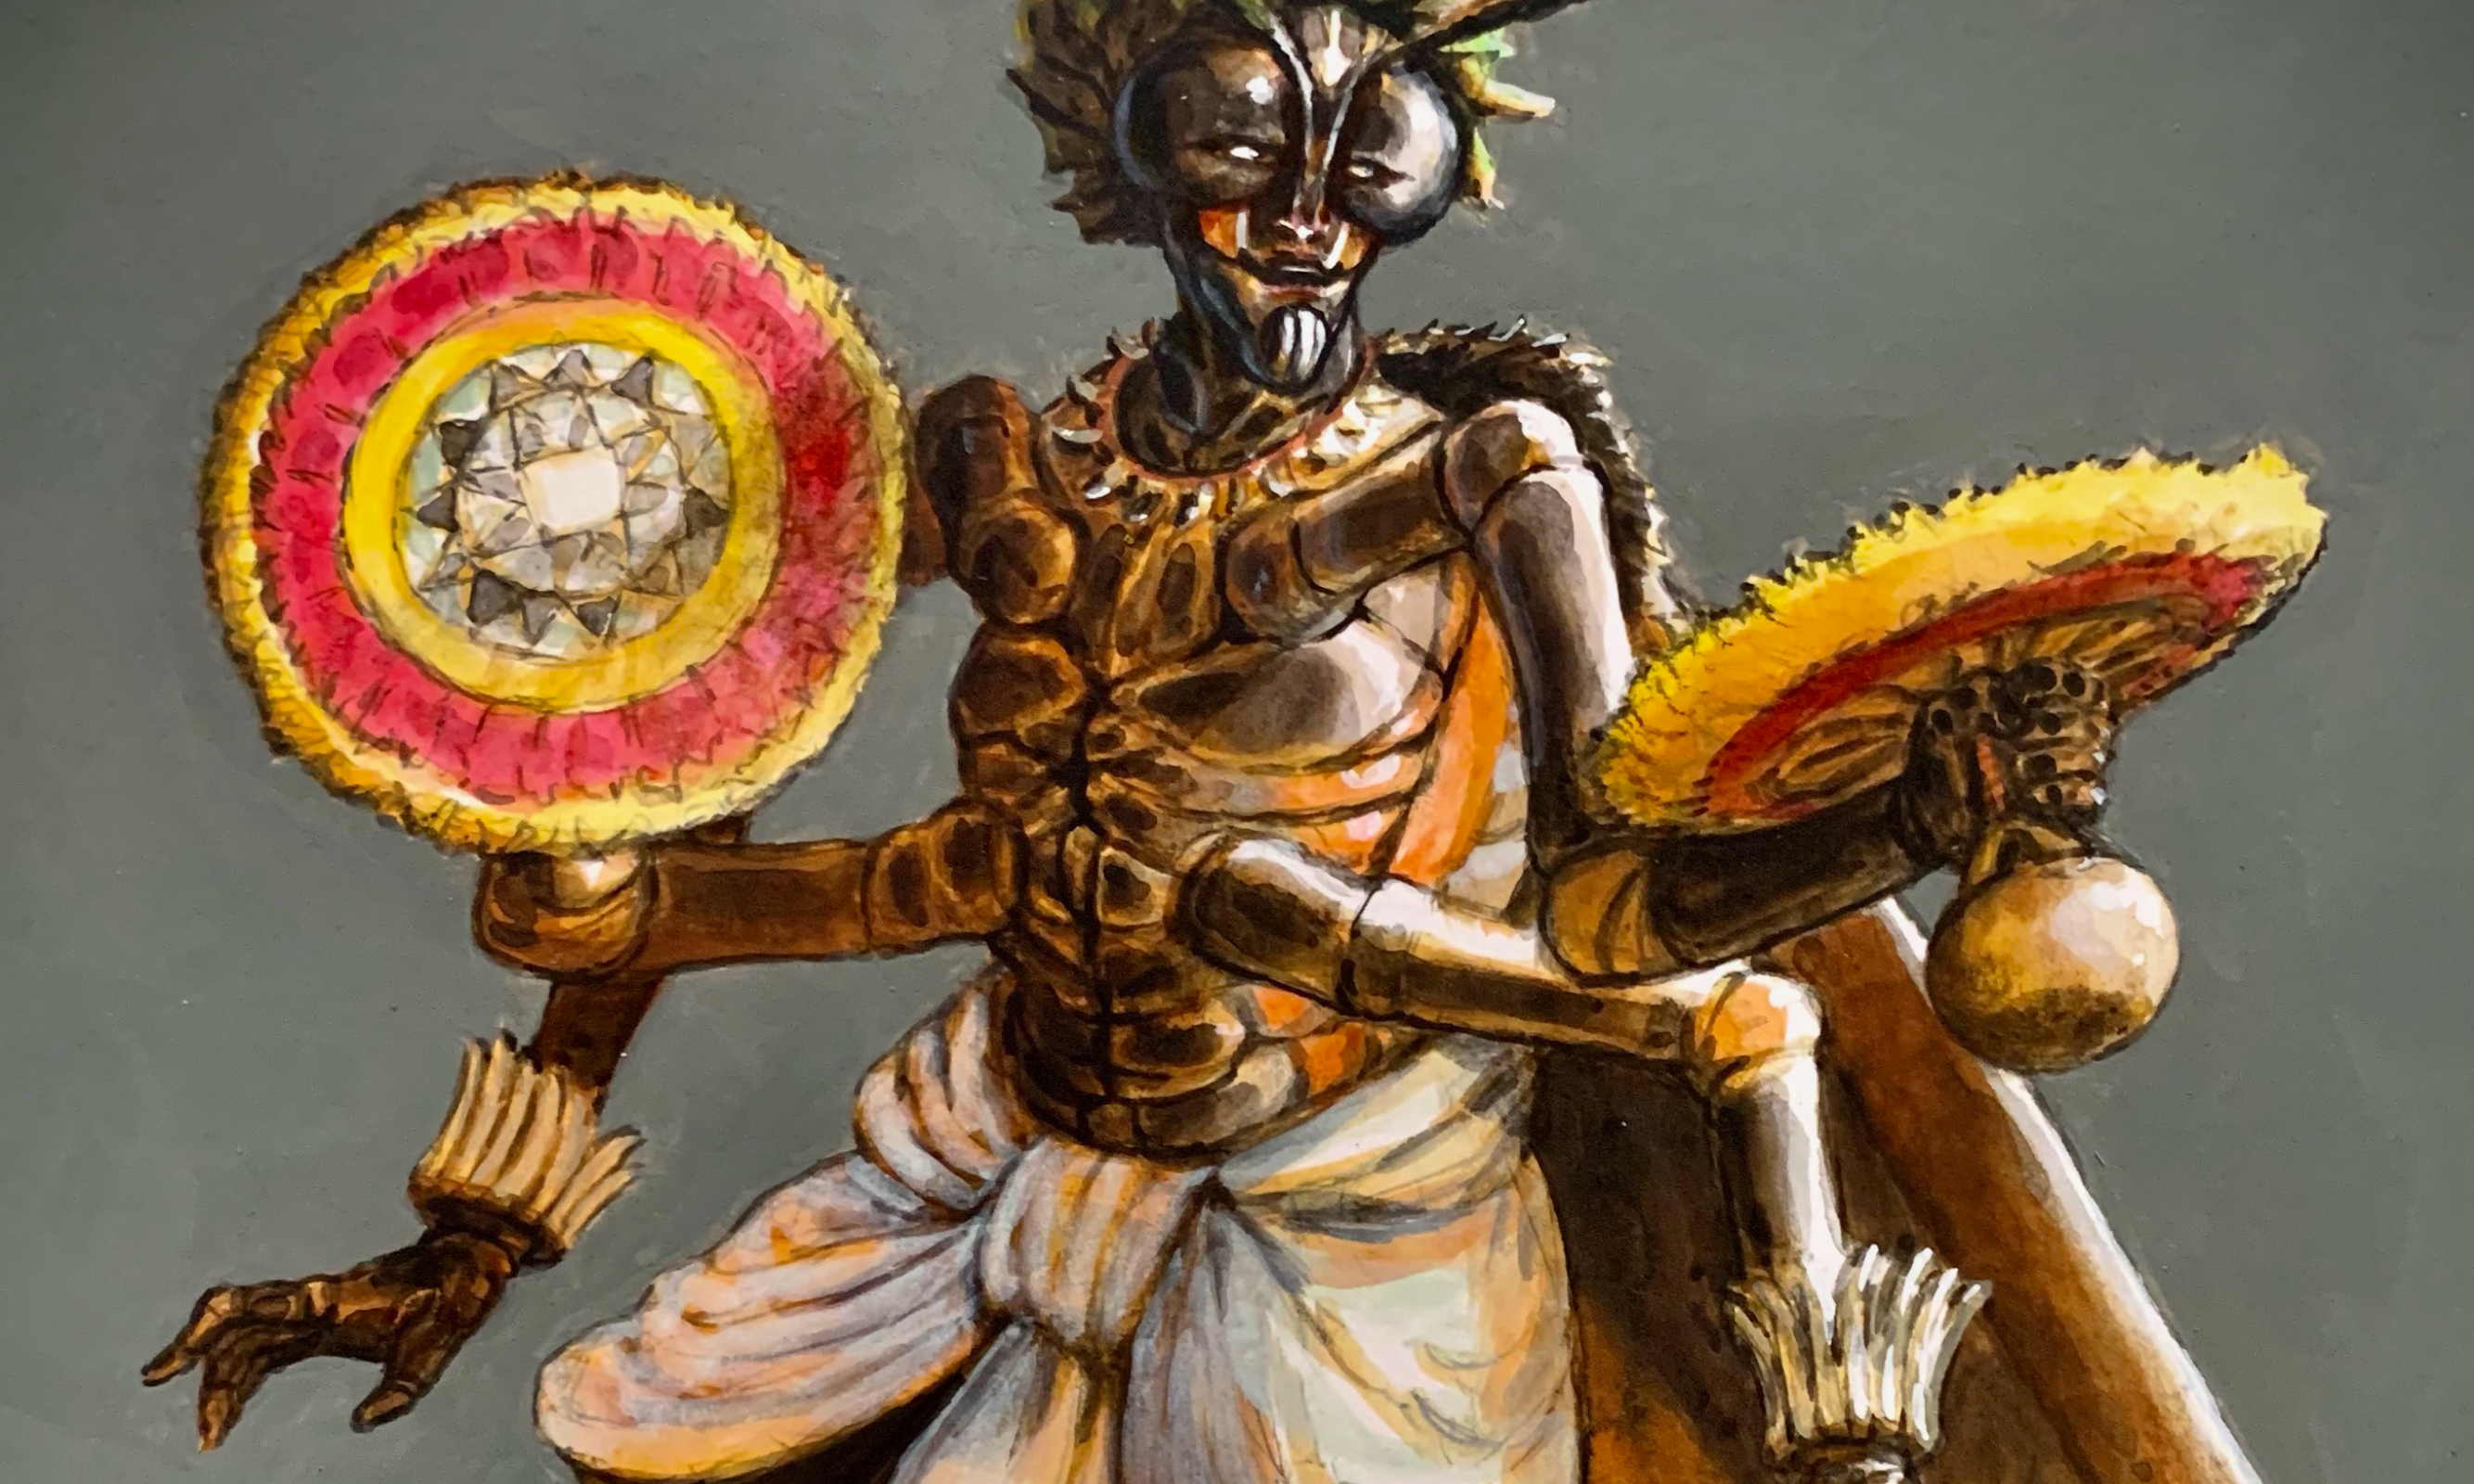 Close up of painting of a humanoid-insect figure holding two ʻuliʻuli (feathered rattles) topped with red and yellow feathers, used in Hula dancing